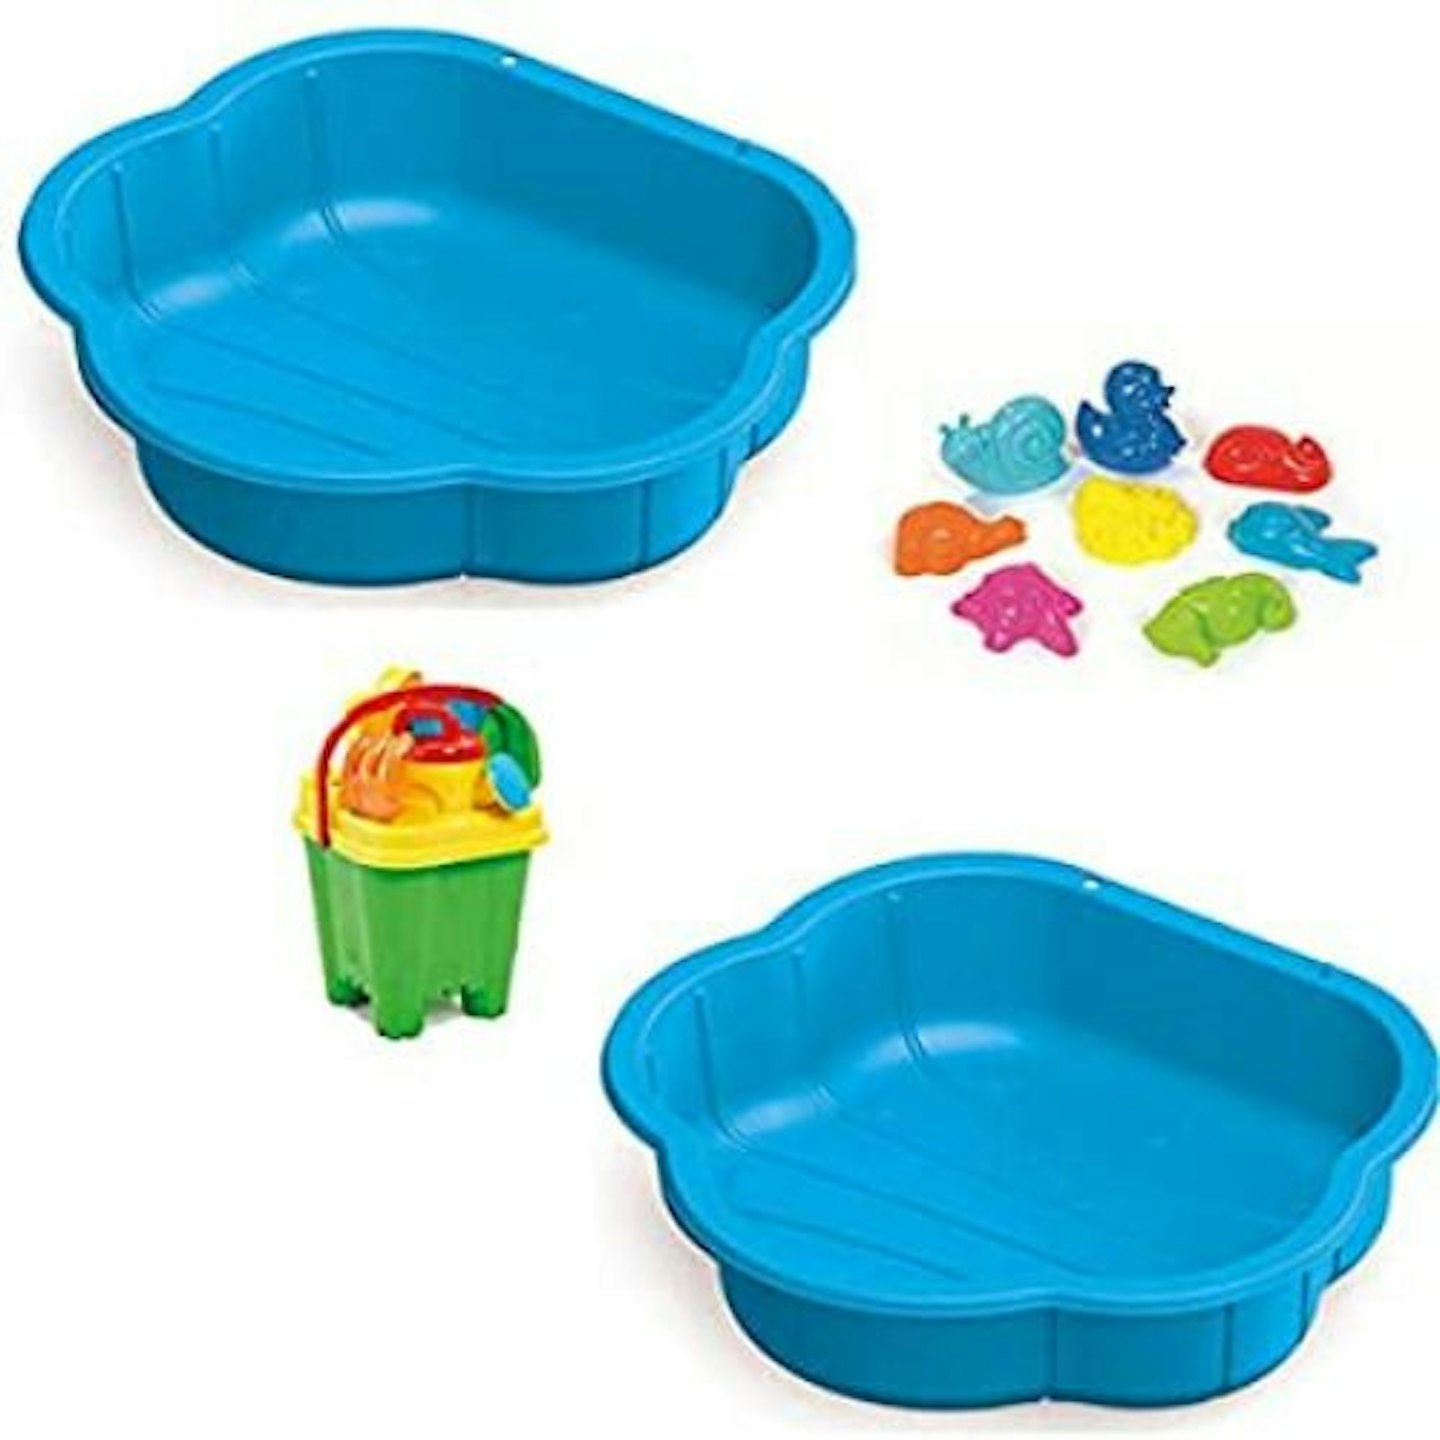 Little Lot Addo Sand & Water Play Pit Set